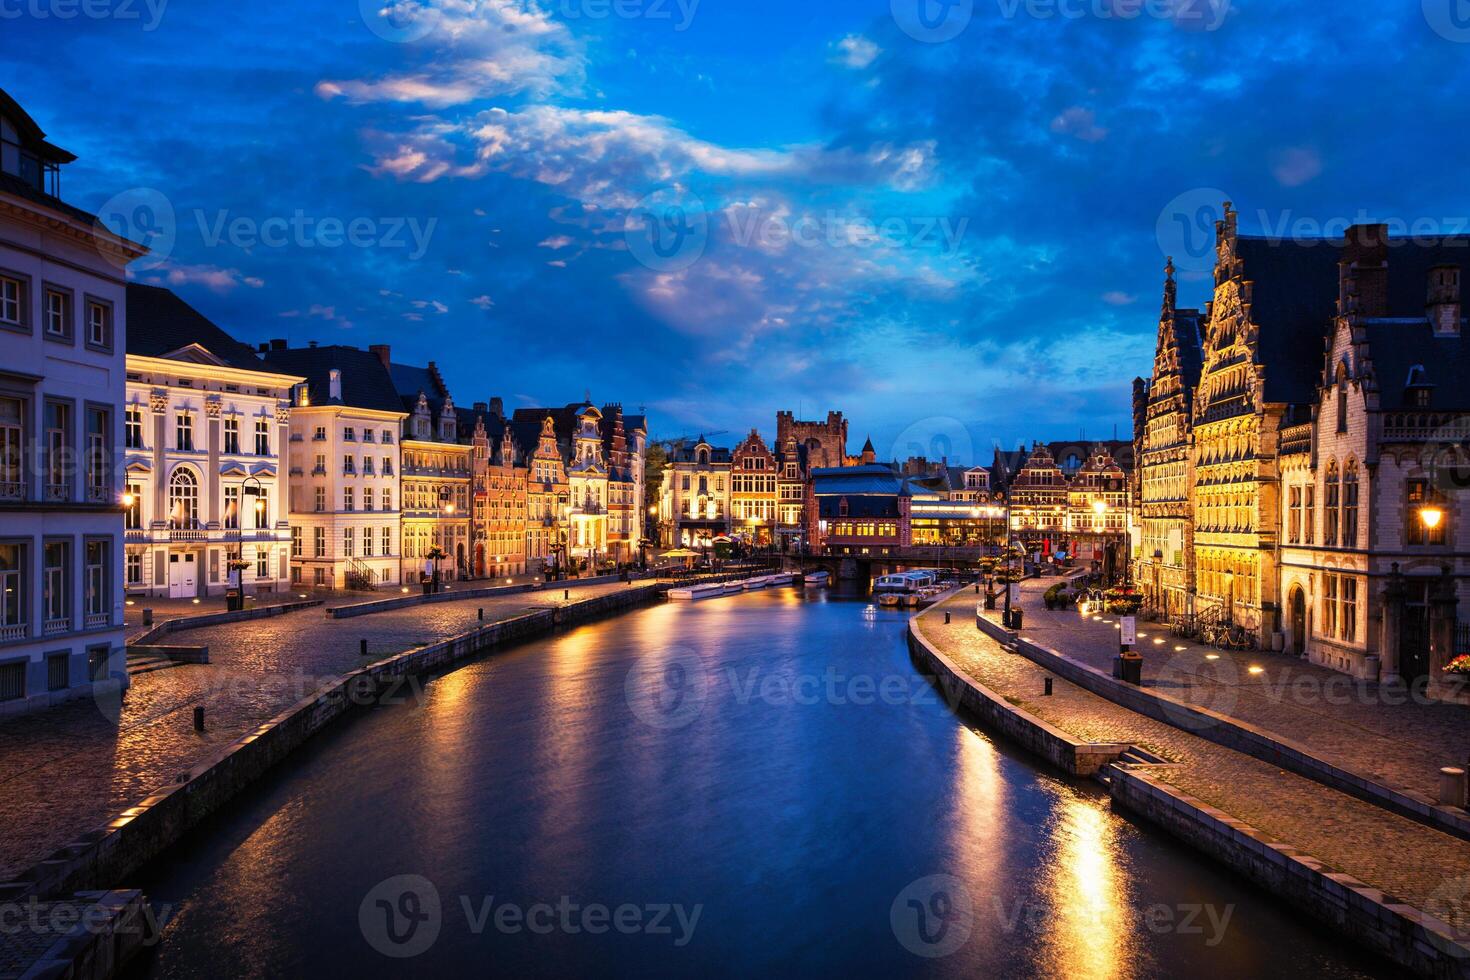 Graslei street and canal in the evening. Ghent, Belgium photo